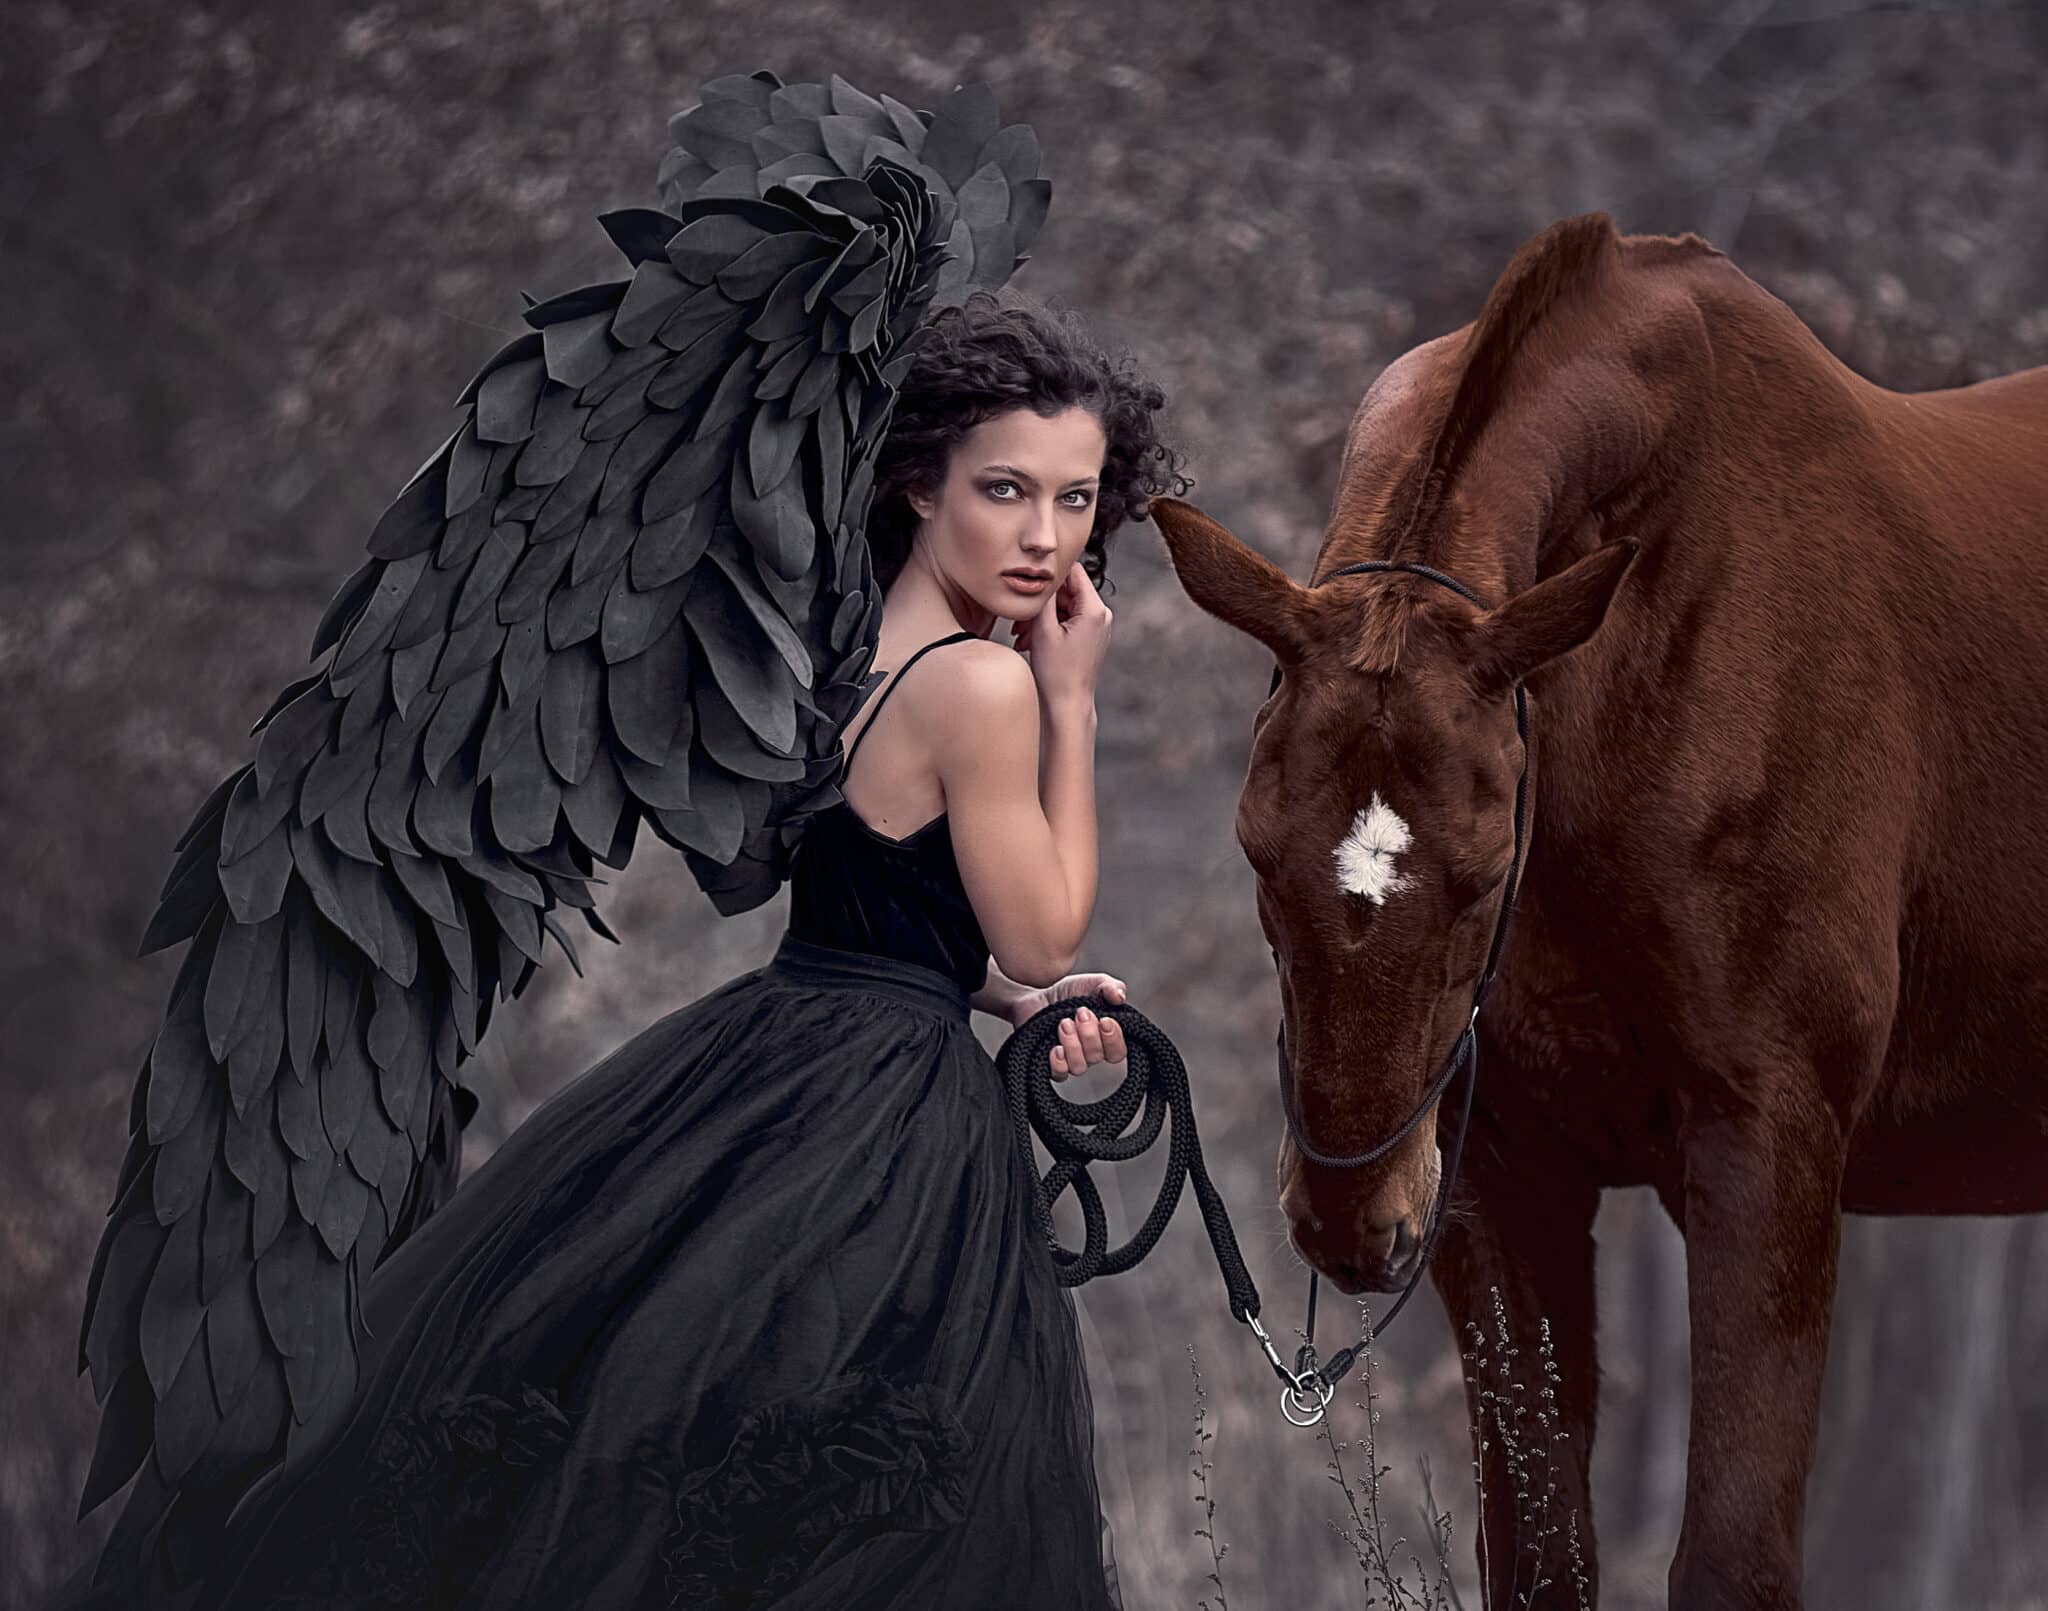 Beautiful black angel next to a brown horse